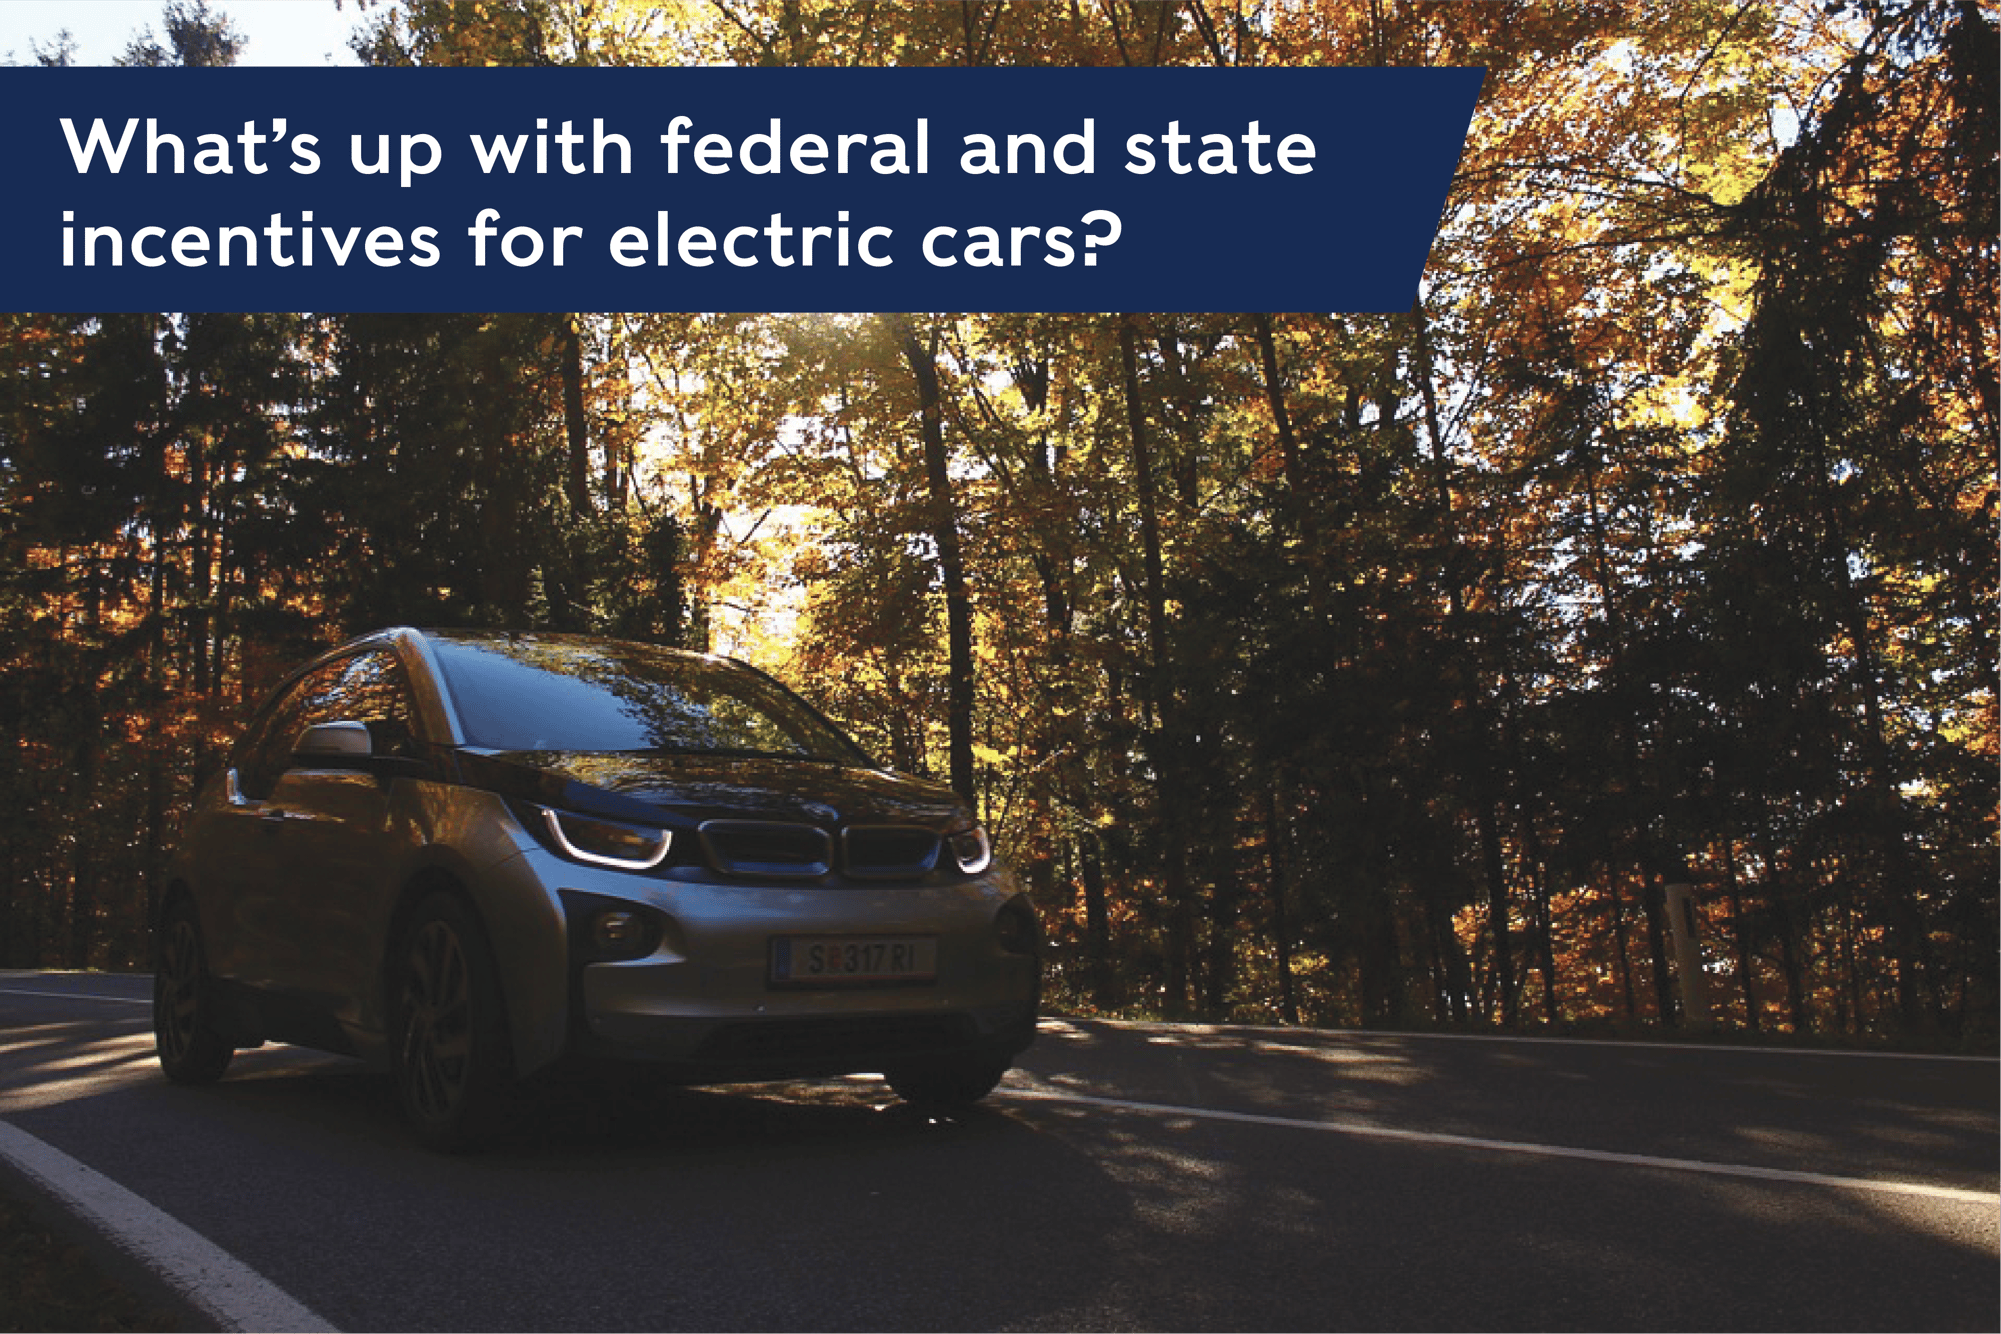 What’s up with federal and state incentives for electric cars?